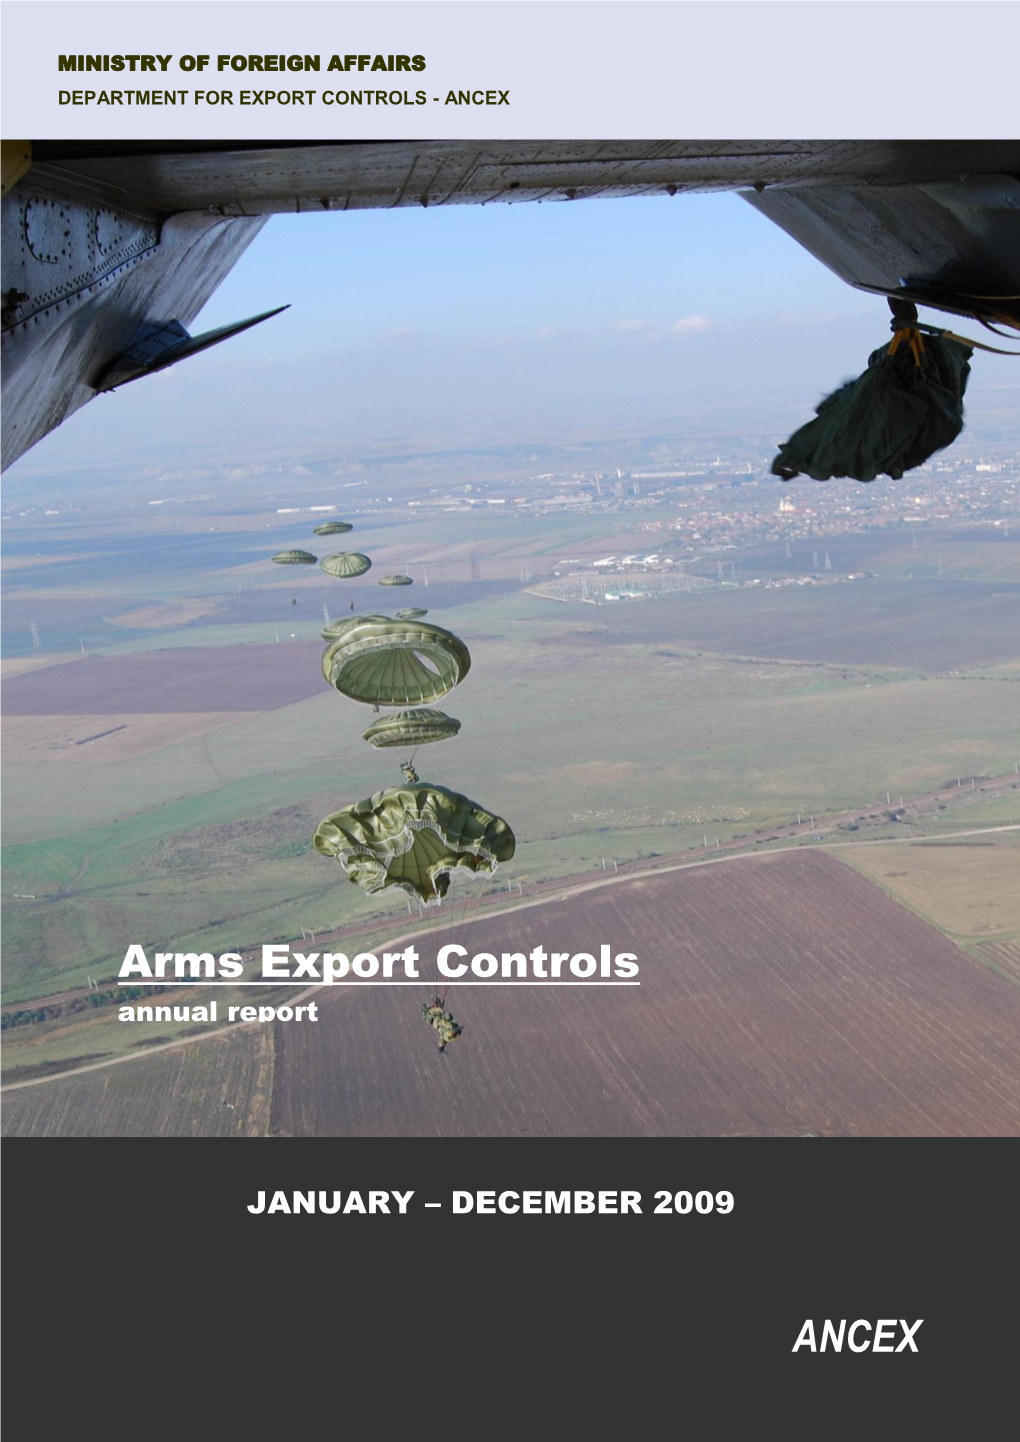 ANCEX Arms Export Controls